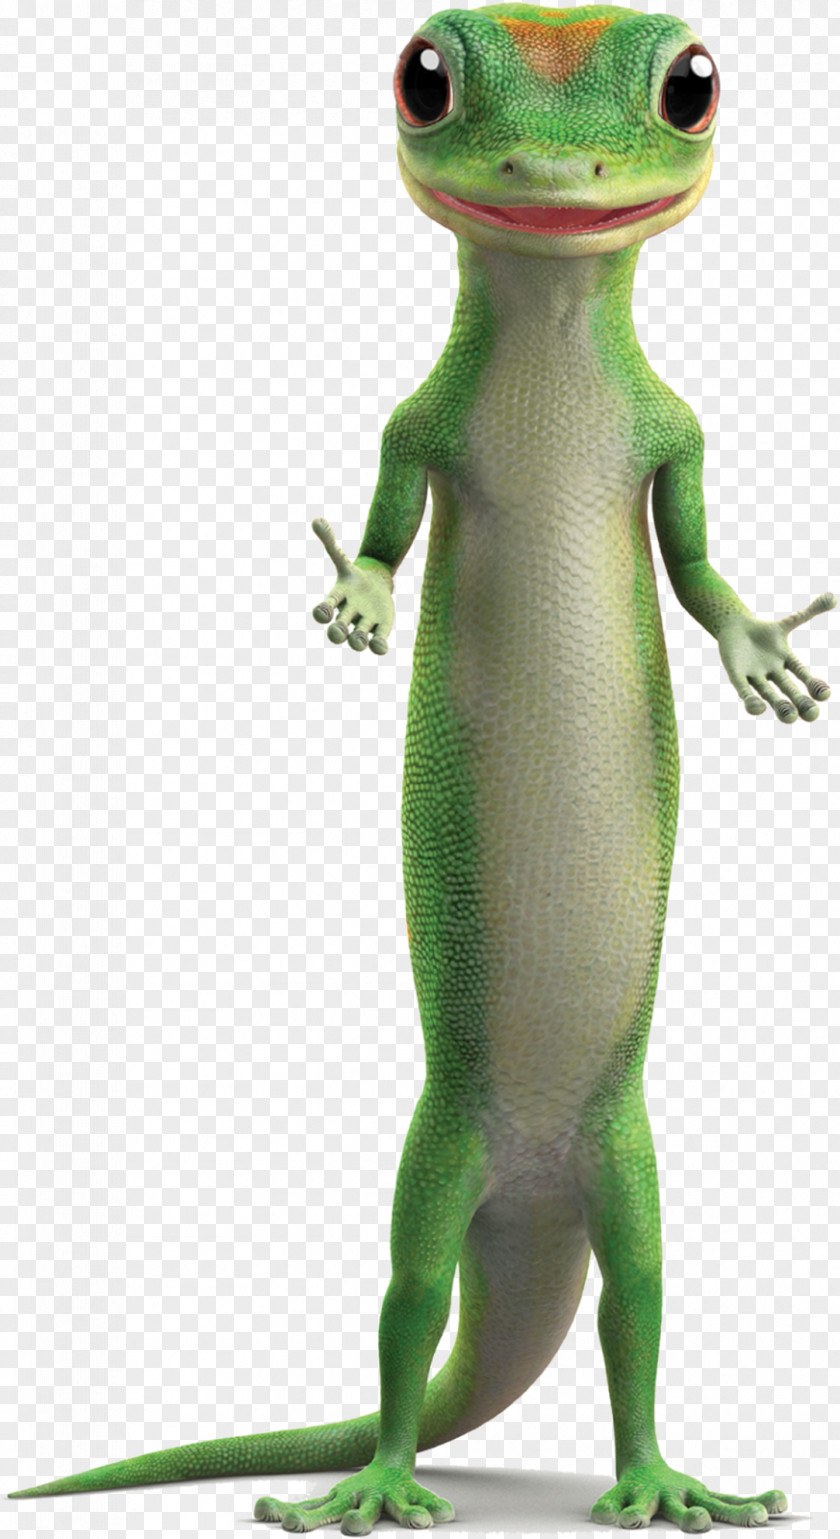 Lizard GEICO Advertising Campaigns Gecko Insurance PNG